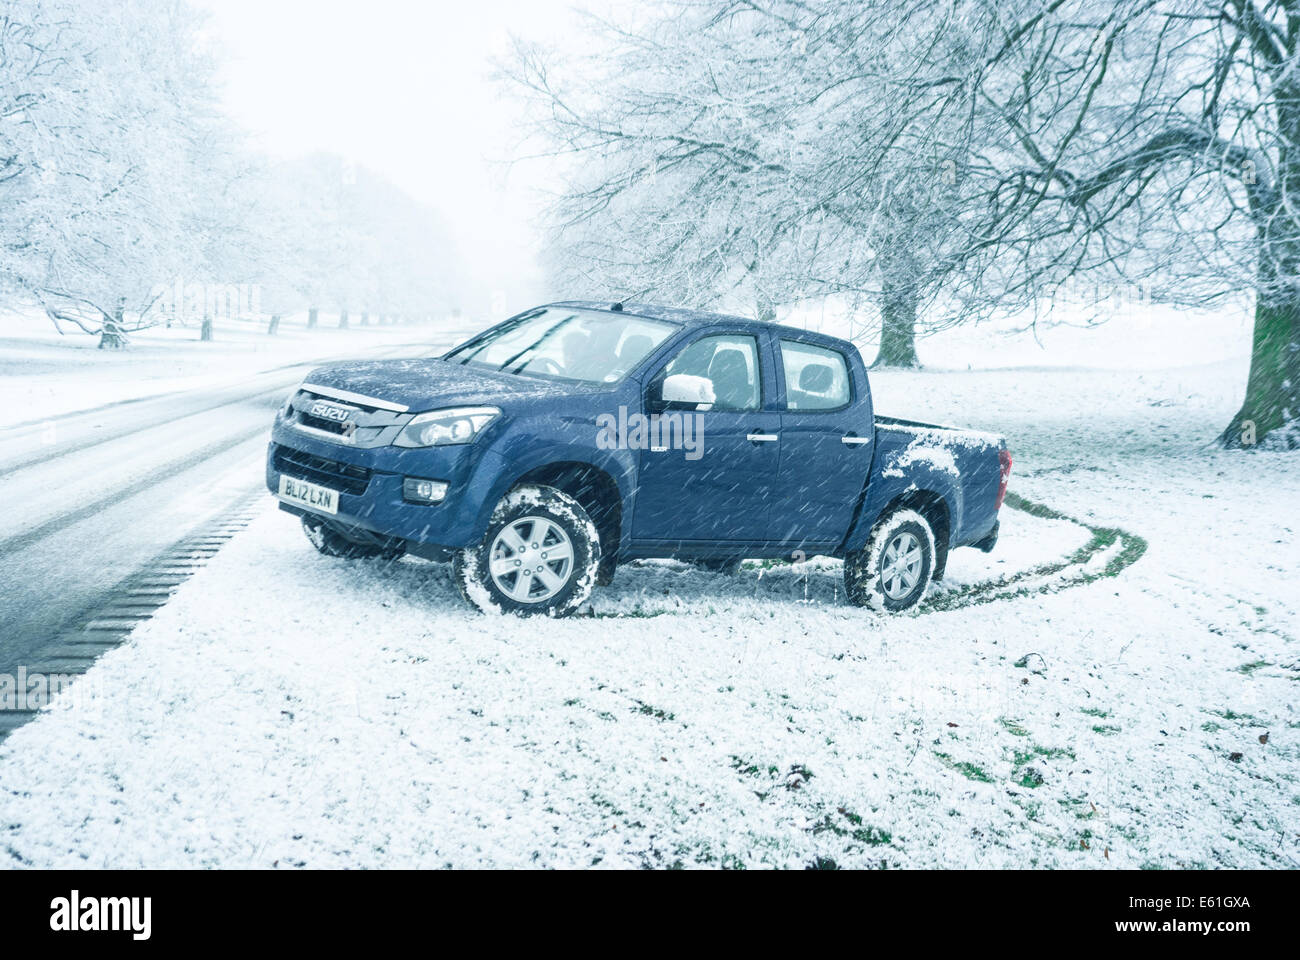 The capable Isuzu D-Max Eiger pickup truck offroad in winter/snow Stock Photo